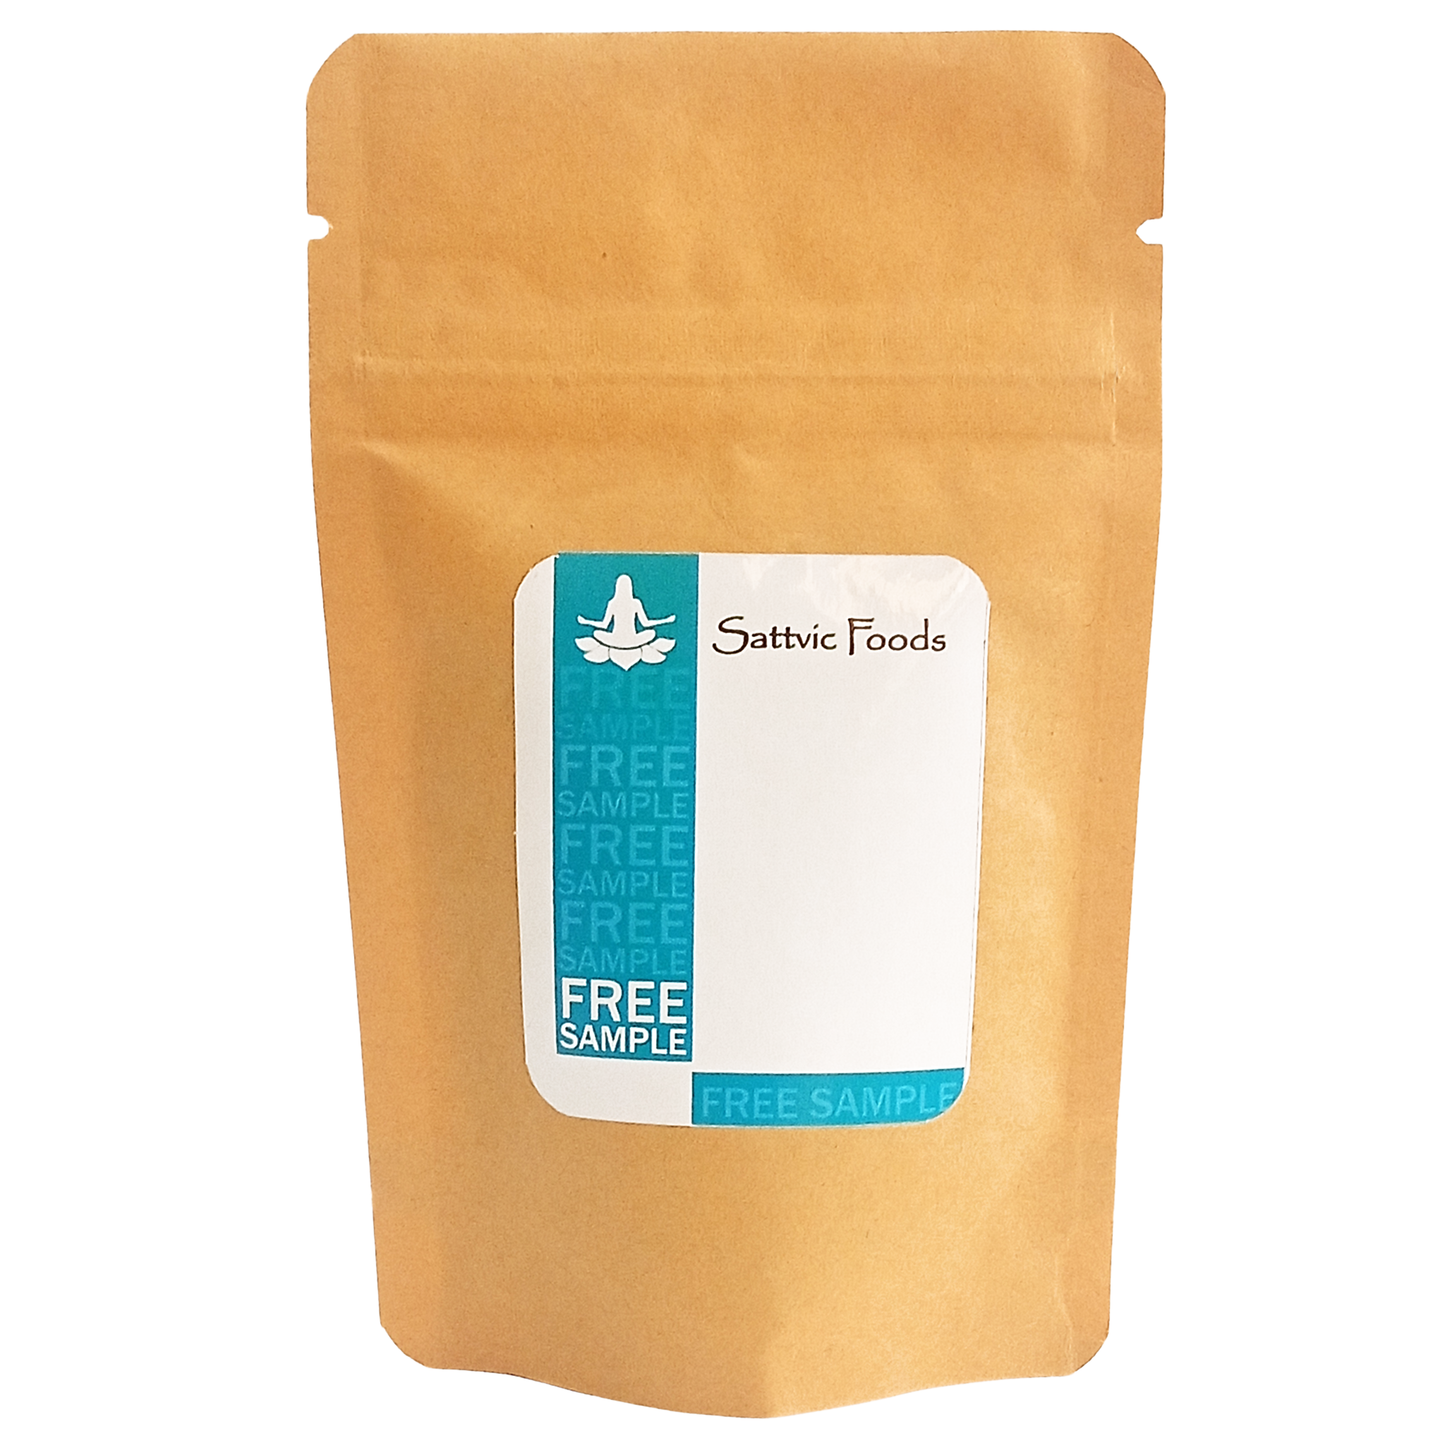 Coconut Flour (Defatted) Sattvic Foods